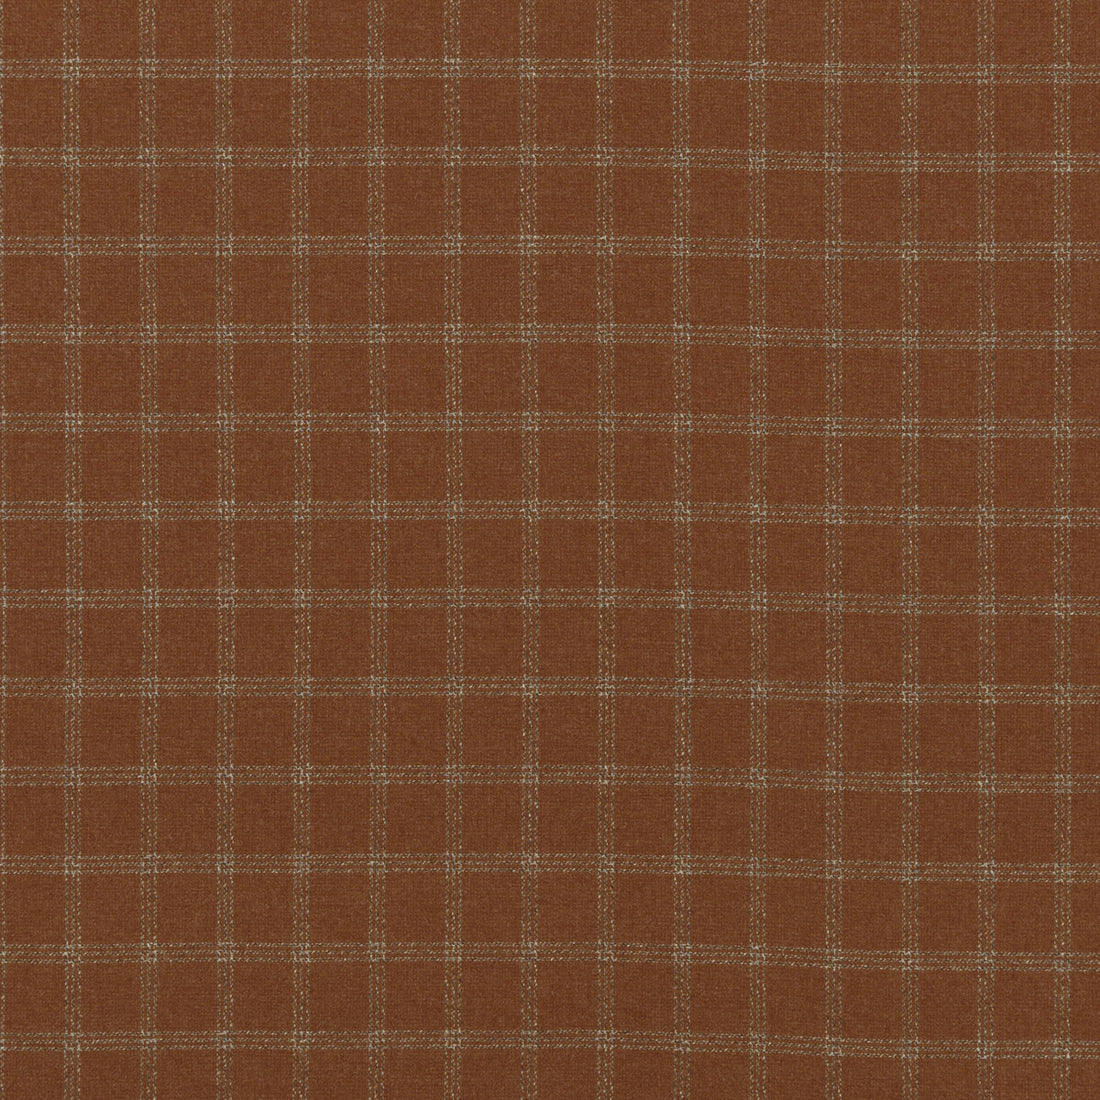 Bute fabric in amber color - pattern FD749.T40.0 - by Mulberry in the Festival collection